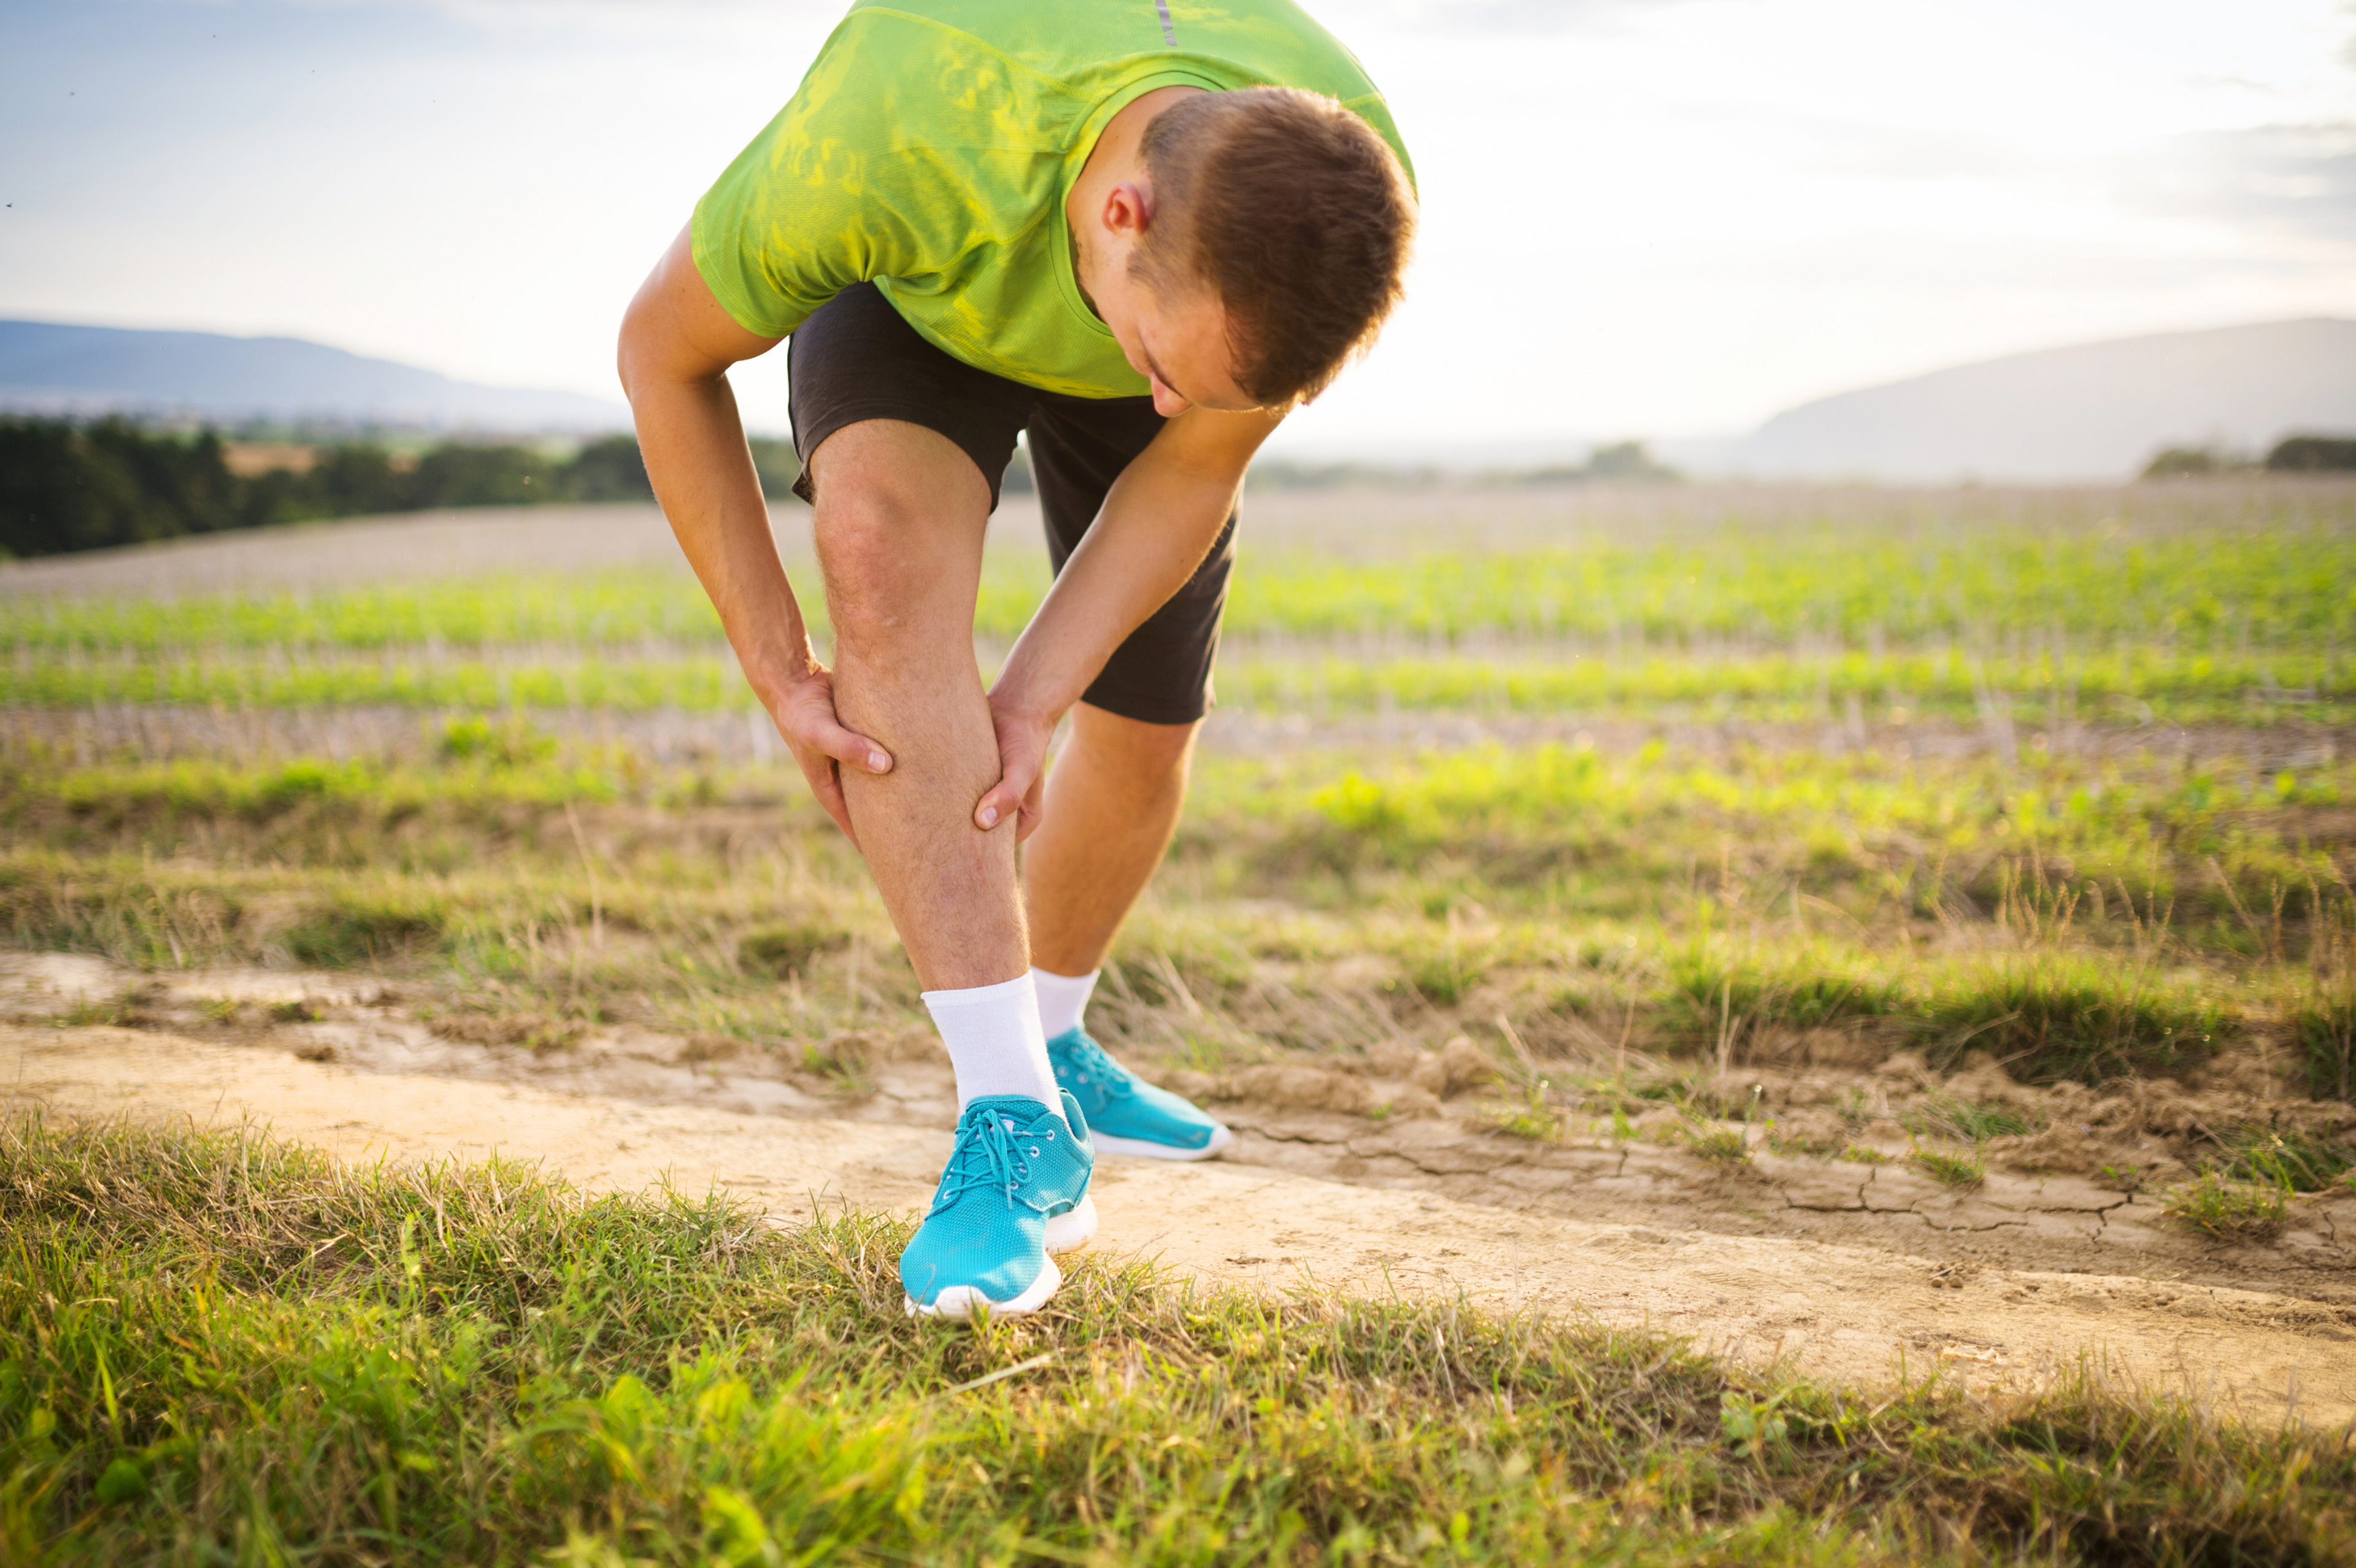 When you strain your calf, the muscle fibers tear. This is why stretching the injured area too soon can worsen your calf strain.